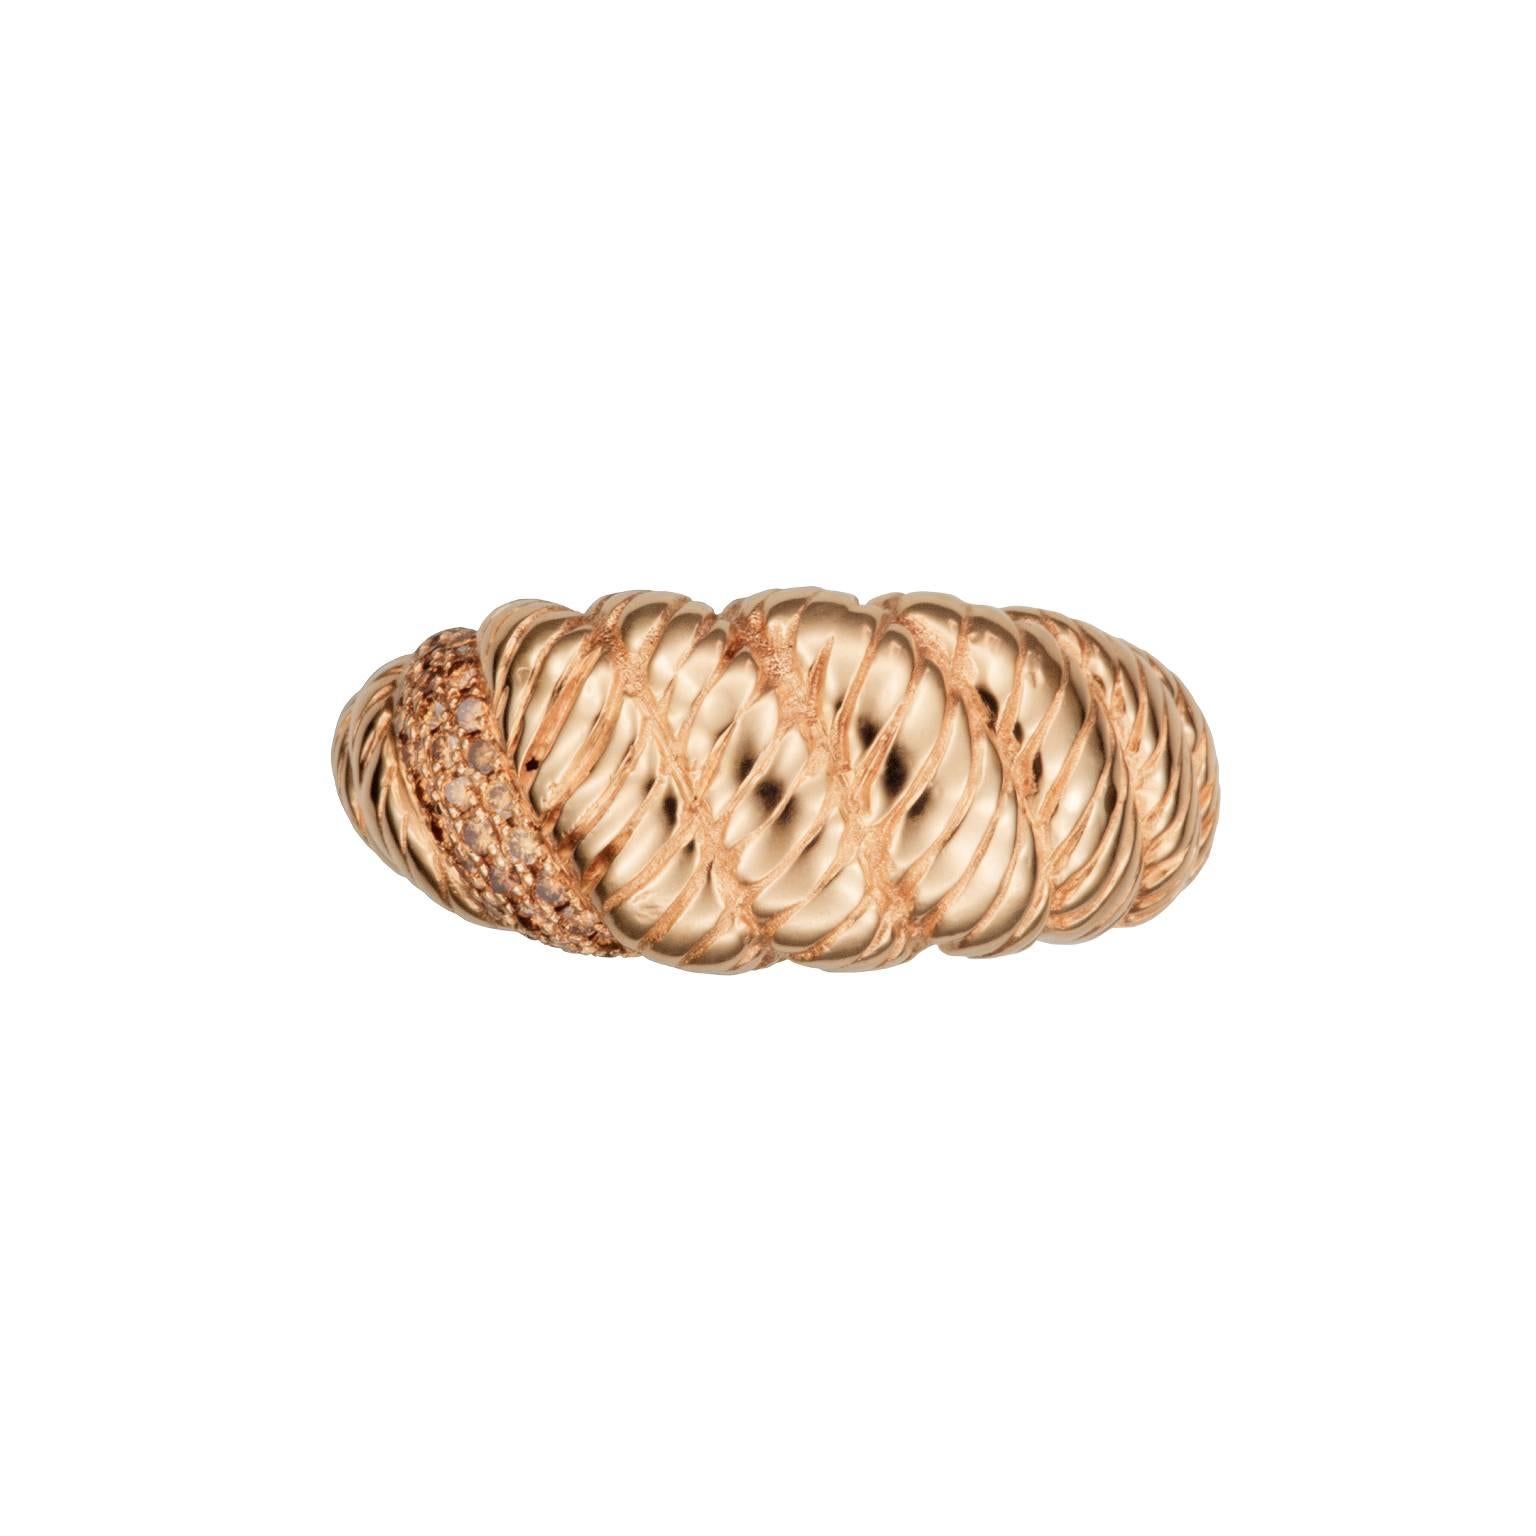 The rose gold Rope Ring is one of Hannah's most detailed tributes to the seafaring character that she based the collection on.

Painstakingly carved by hand from wax, this shape is both tactile and ample. Its 18k rose gold allows each tiny detail